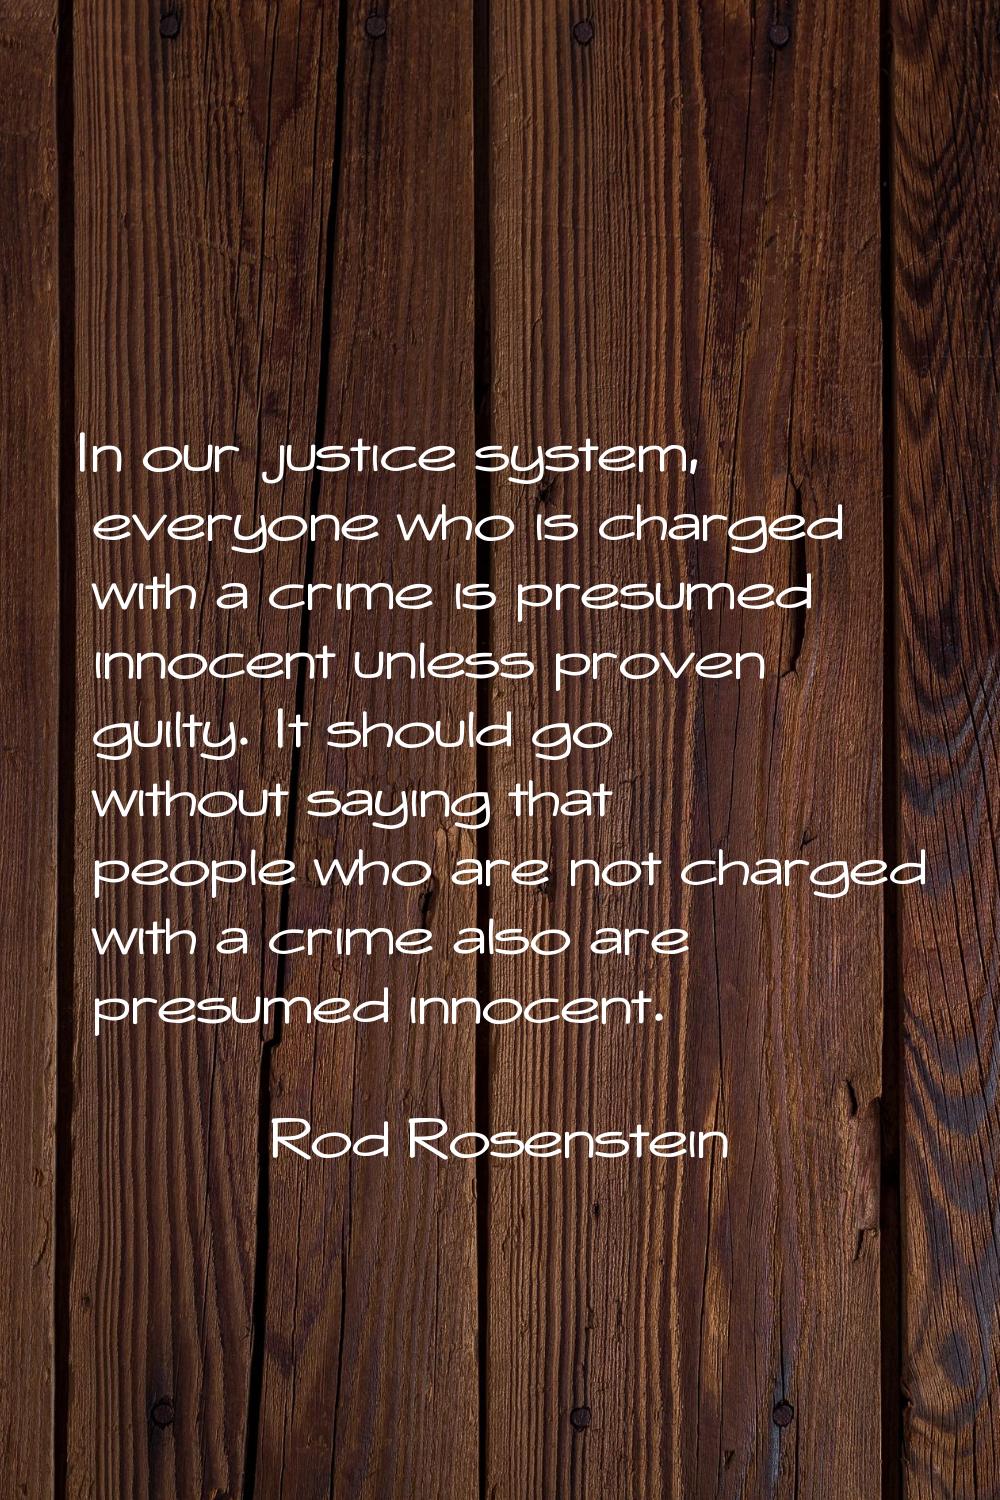 In our justice system, everyone who is charged with a crime is presumed innocent unless proven guil